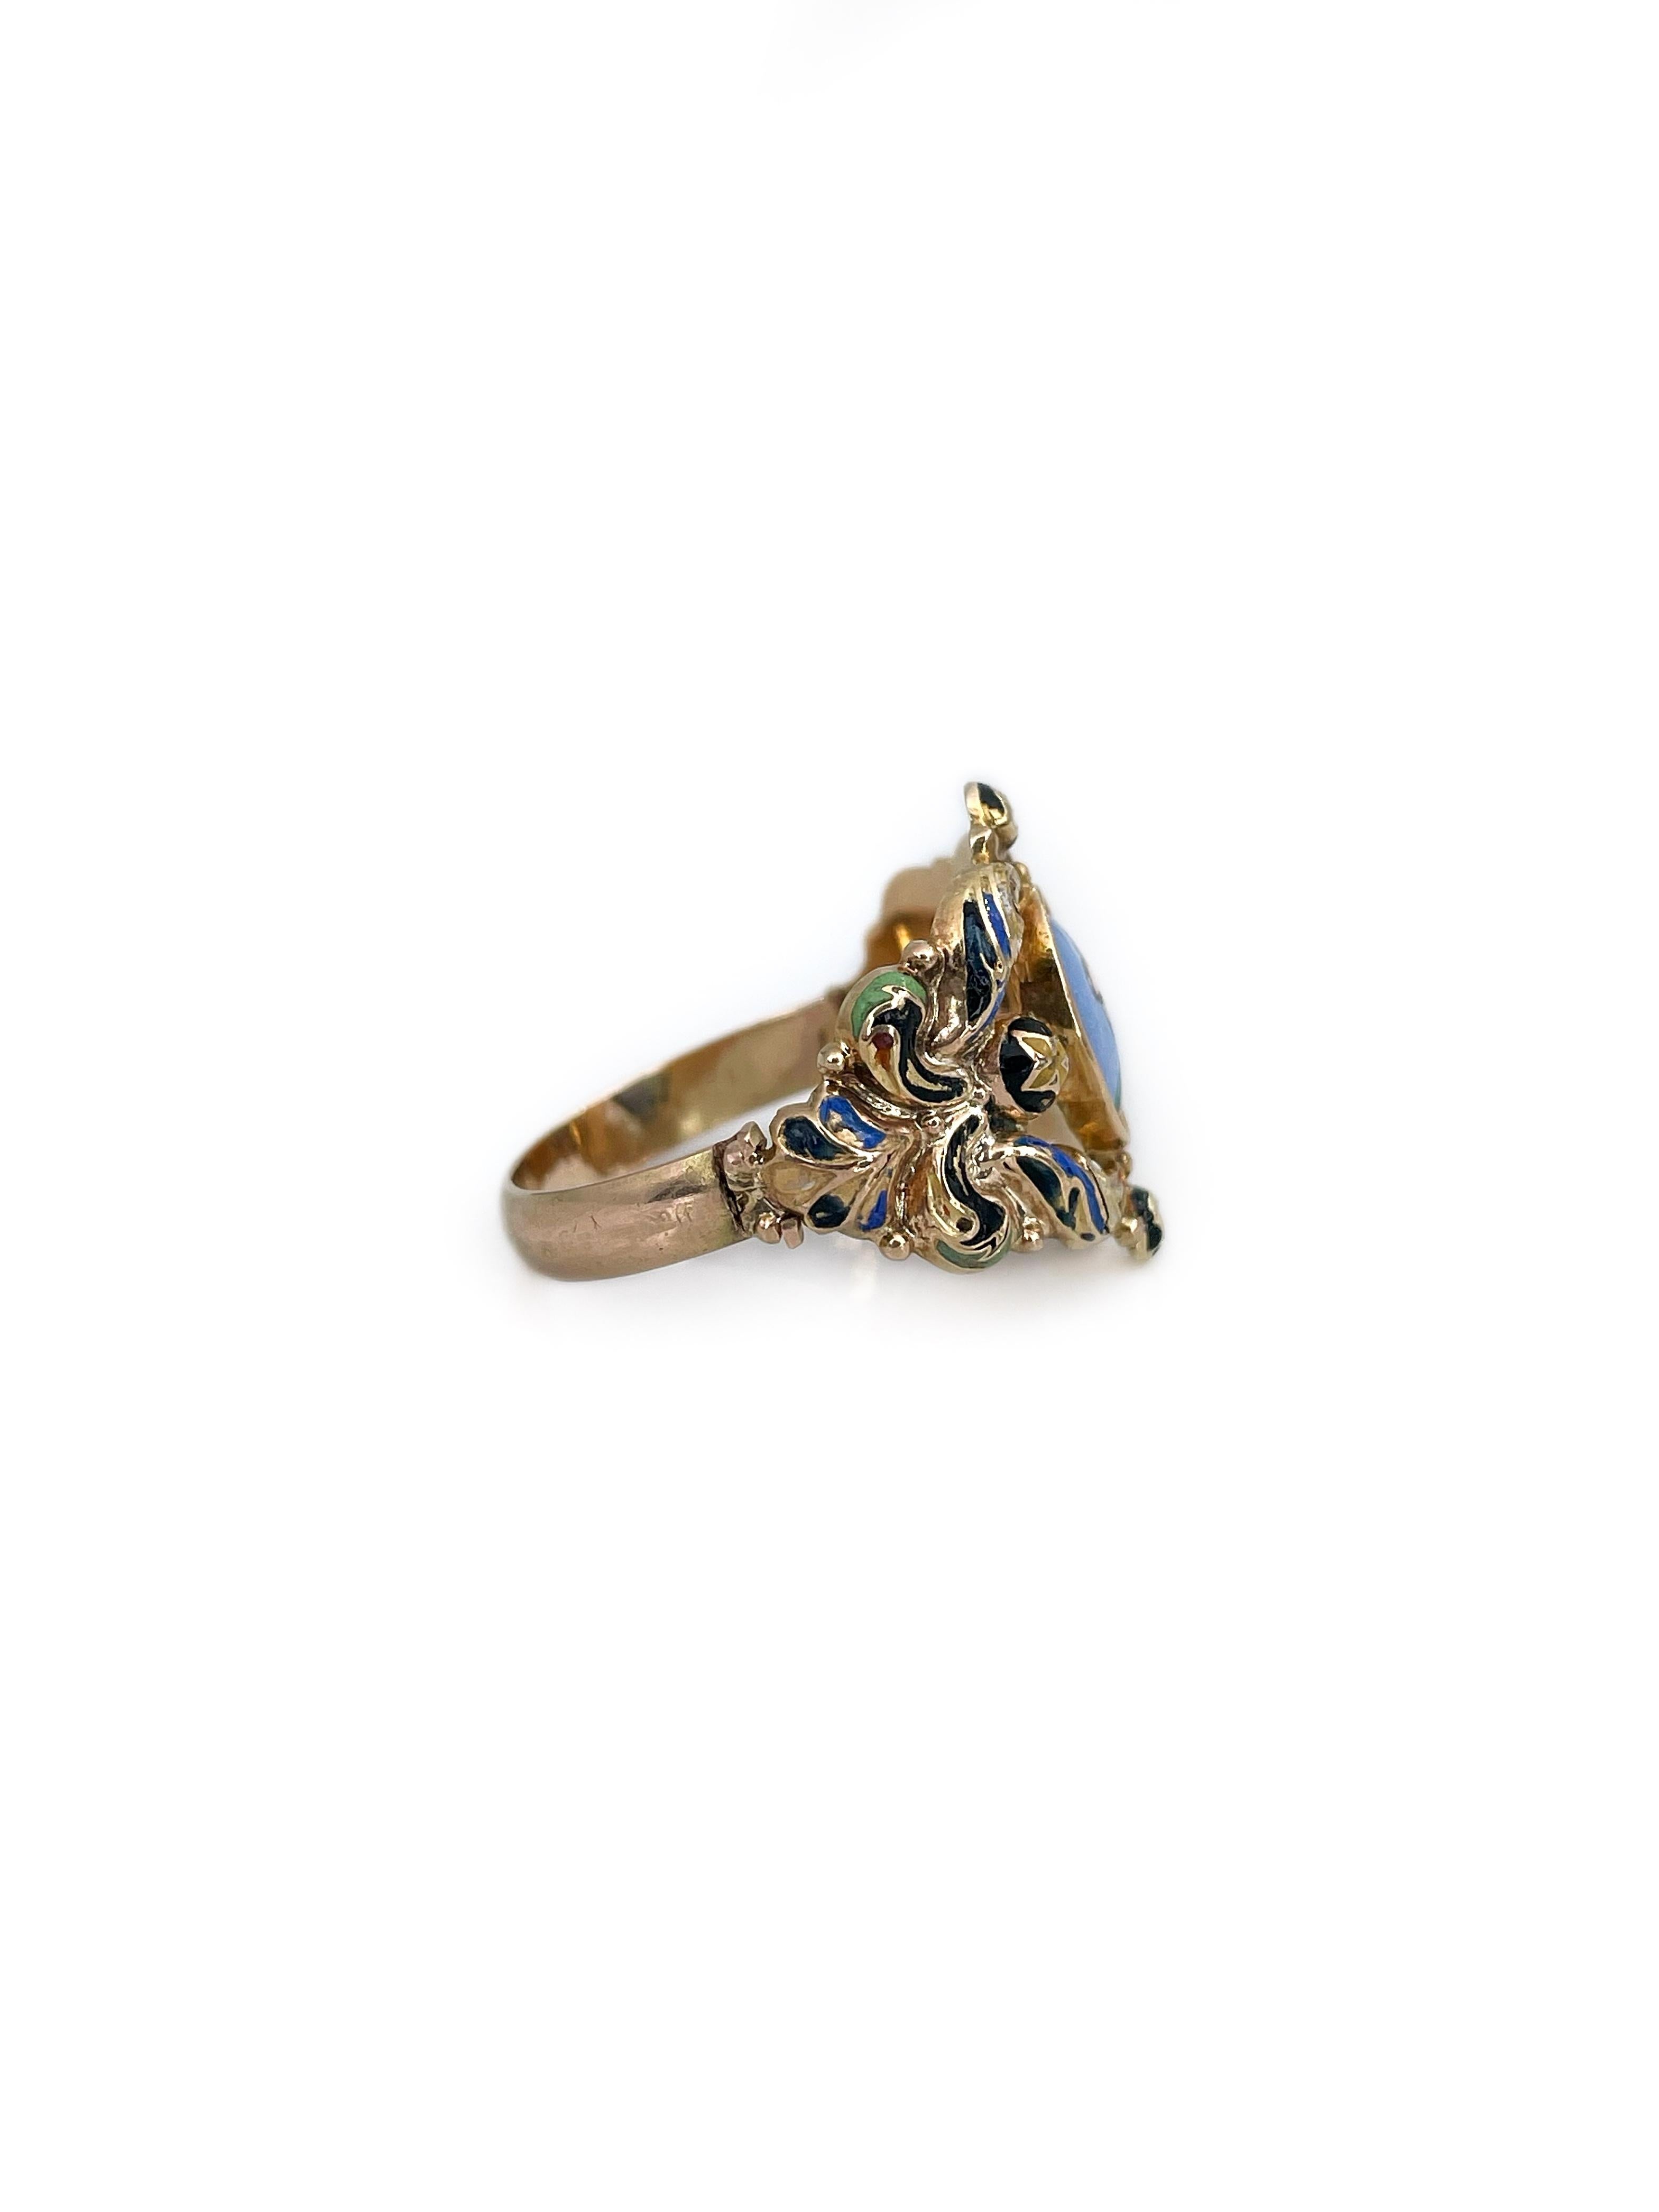 This is a Georgian miniature portrait ring crafted in 18K gold. The piece features detailed hand painted portrait of a lady. It is adorned with colourful enamel (average condition - can be seen in photos). It is seems that the shank has been after